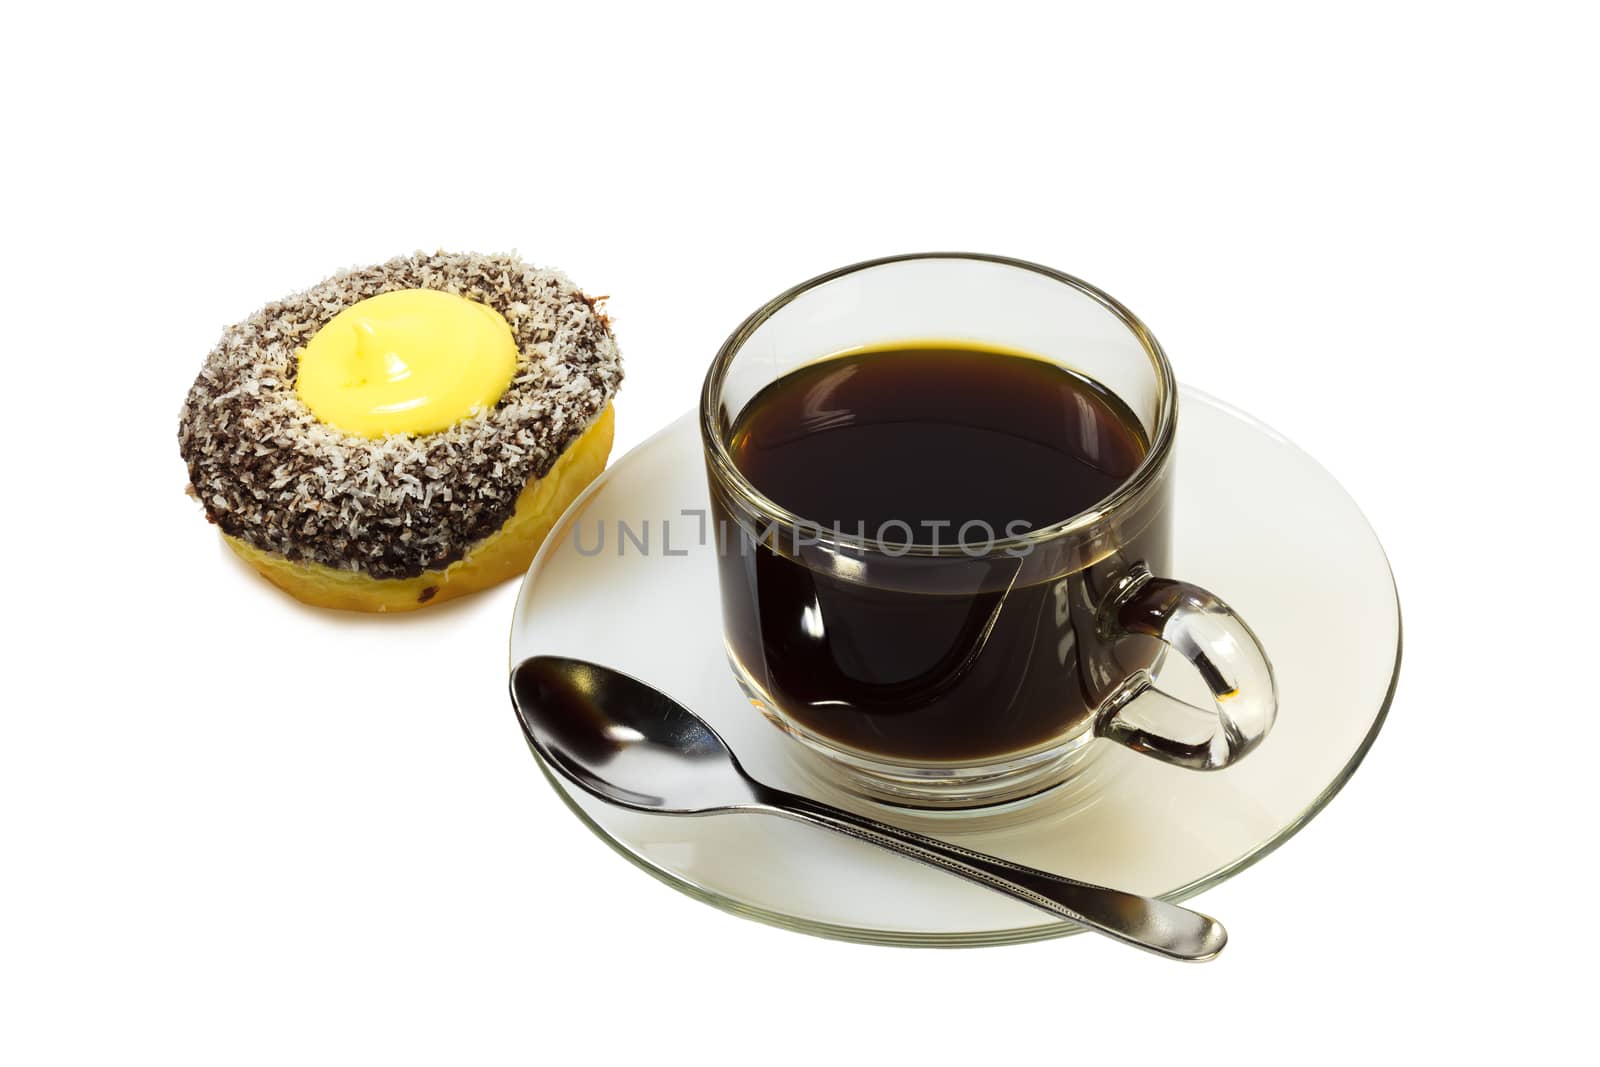 Doughnut and black coffee on white background